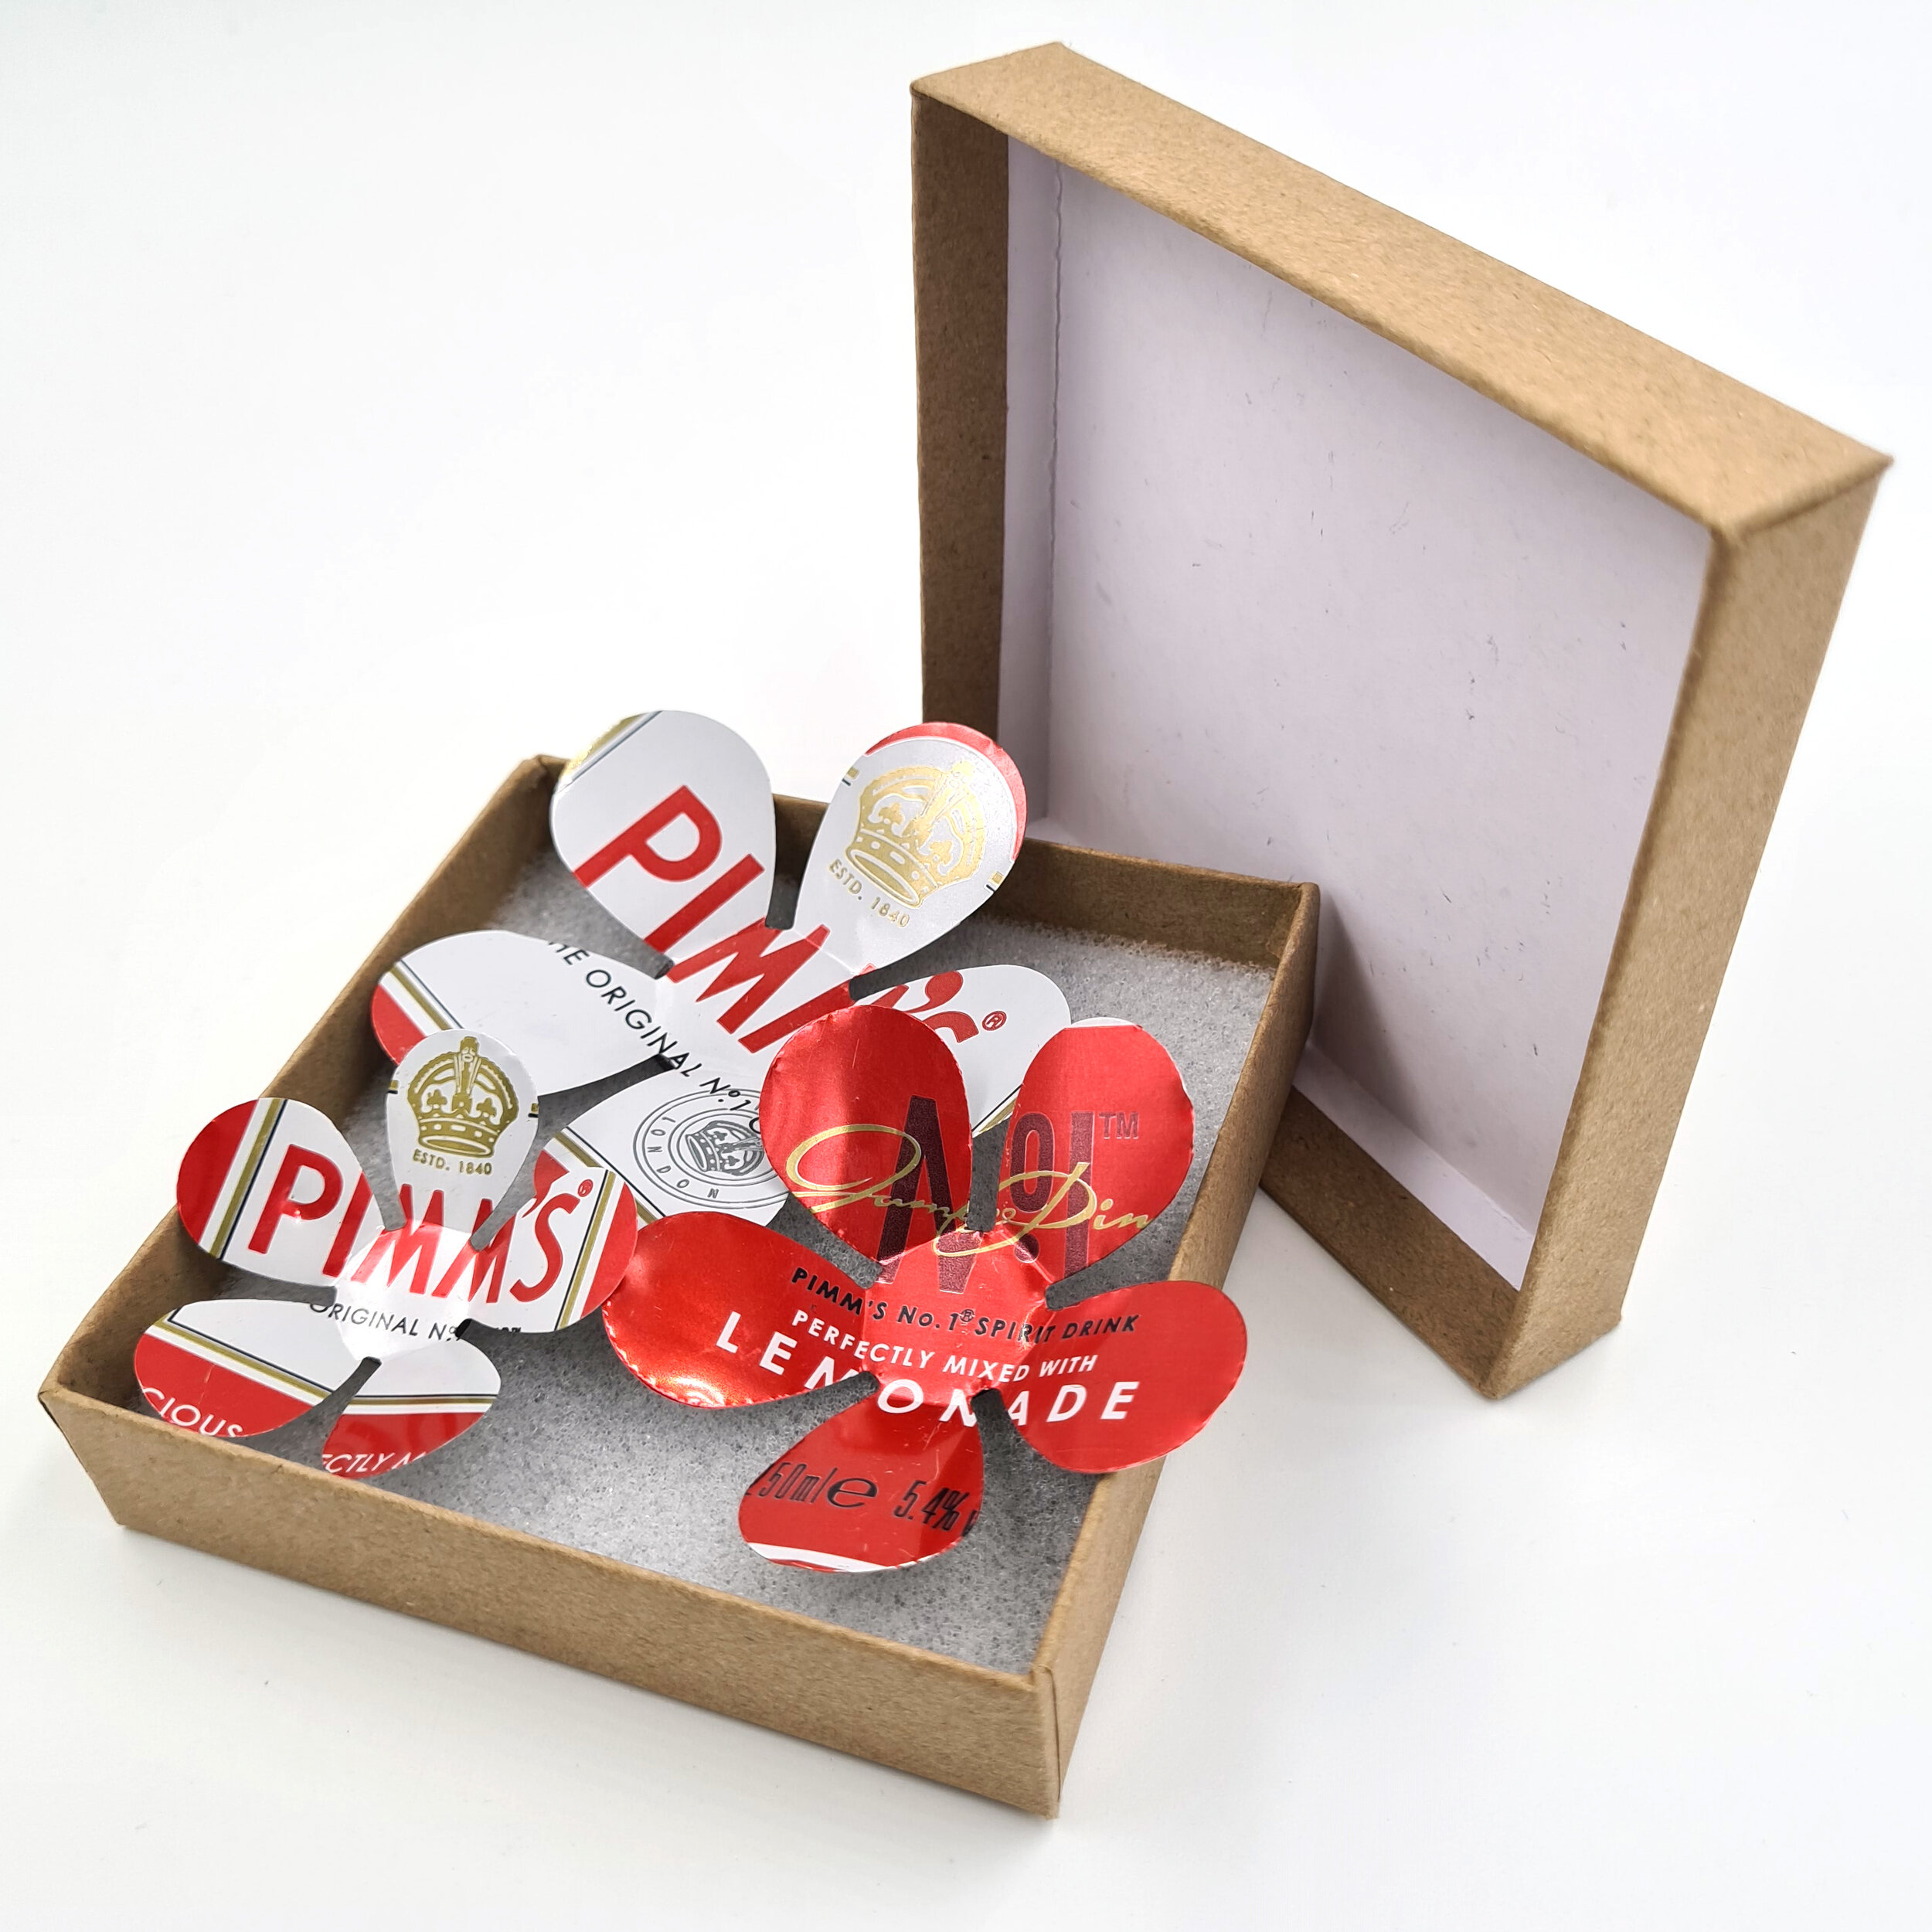 Pimm's red and white sustainable tin Can Flower Magnets 